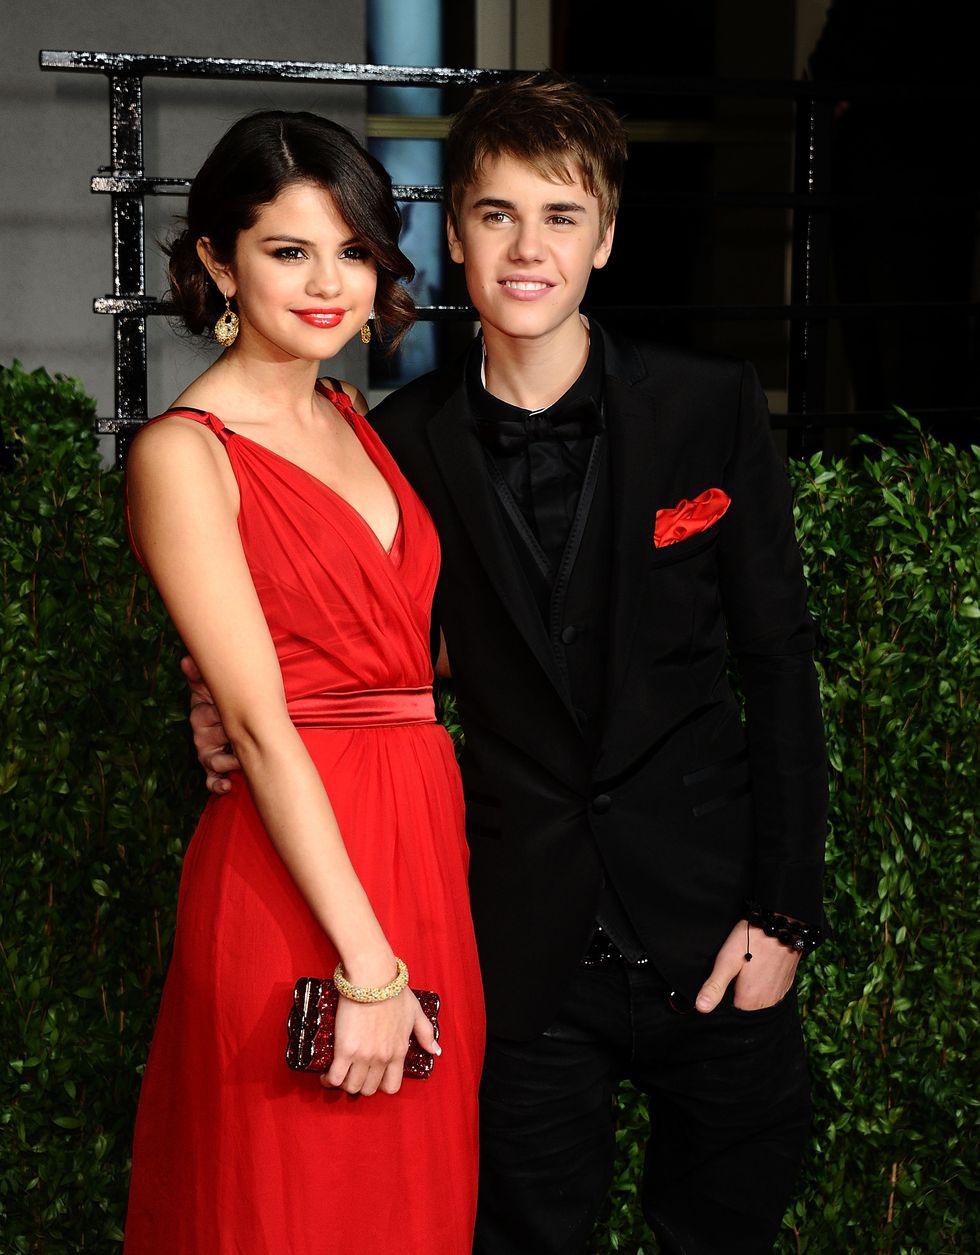 west hollywood, ca february 27 actress selena gomez l and singer justin bieber arrive at the vanity fair oscar party hosted by graydon carter held at sunset tower on february 27, 2011 in west hollywood, california photo by michael bucknerwireimage